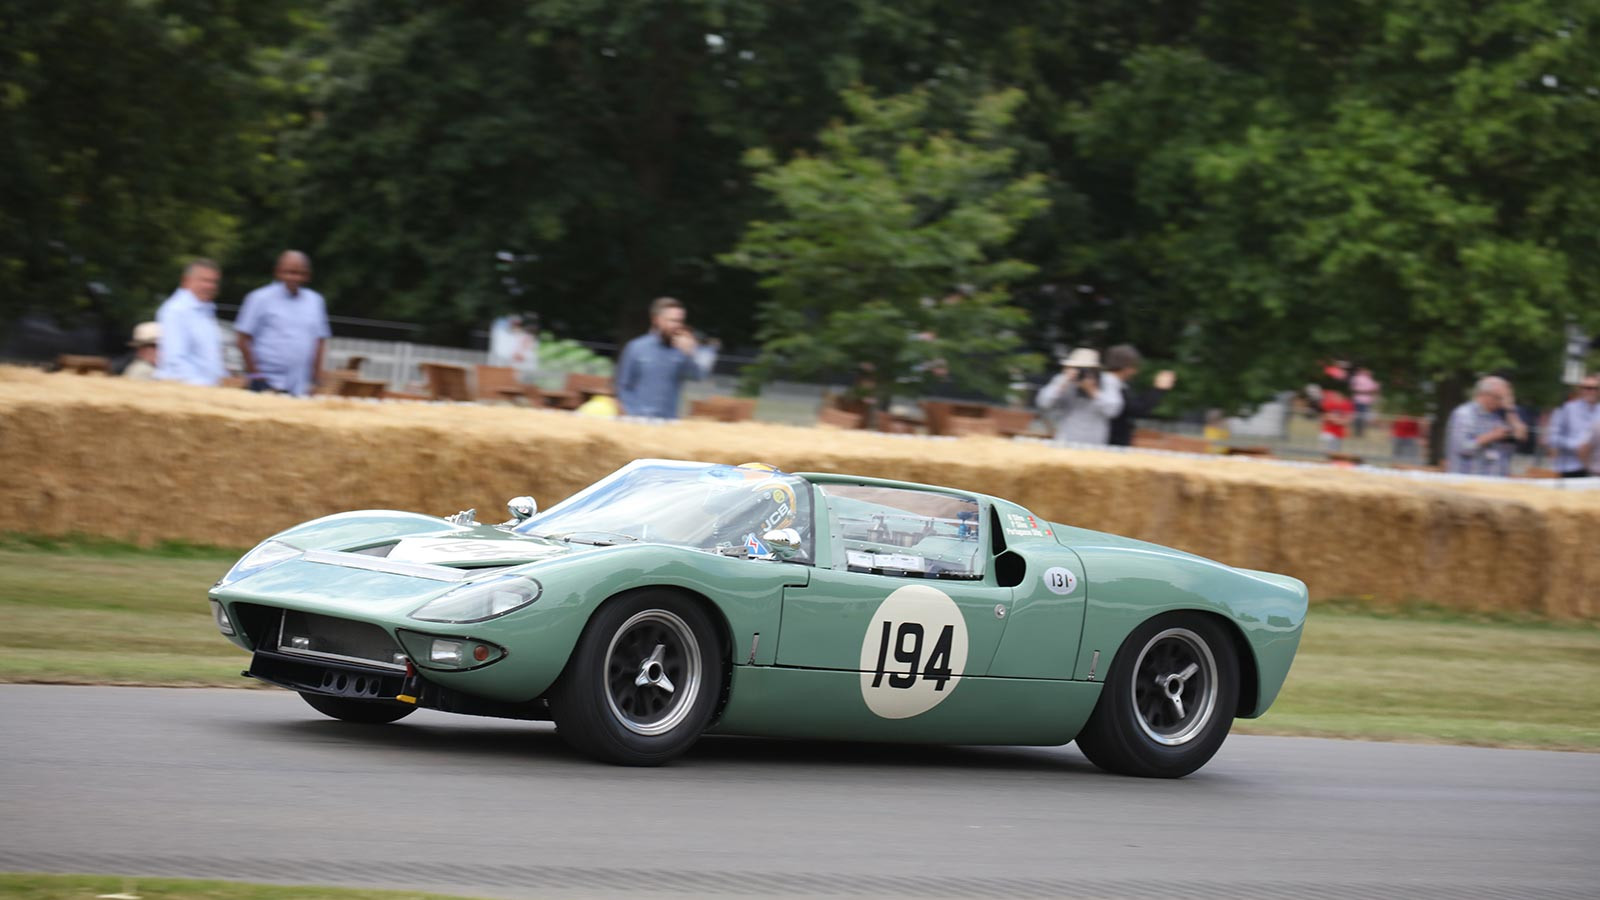 In pictures: the best classic cars at Goodwood FoS 2019